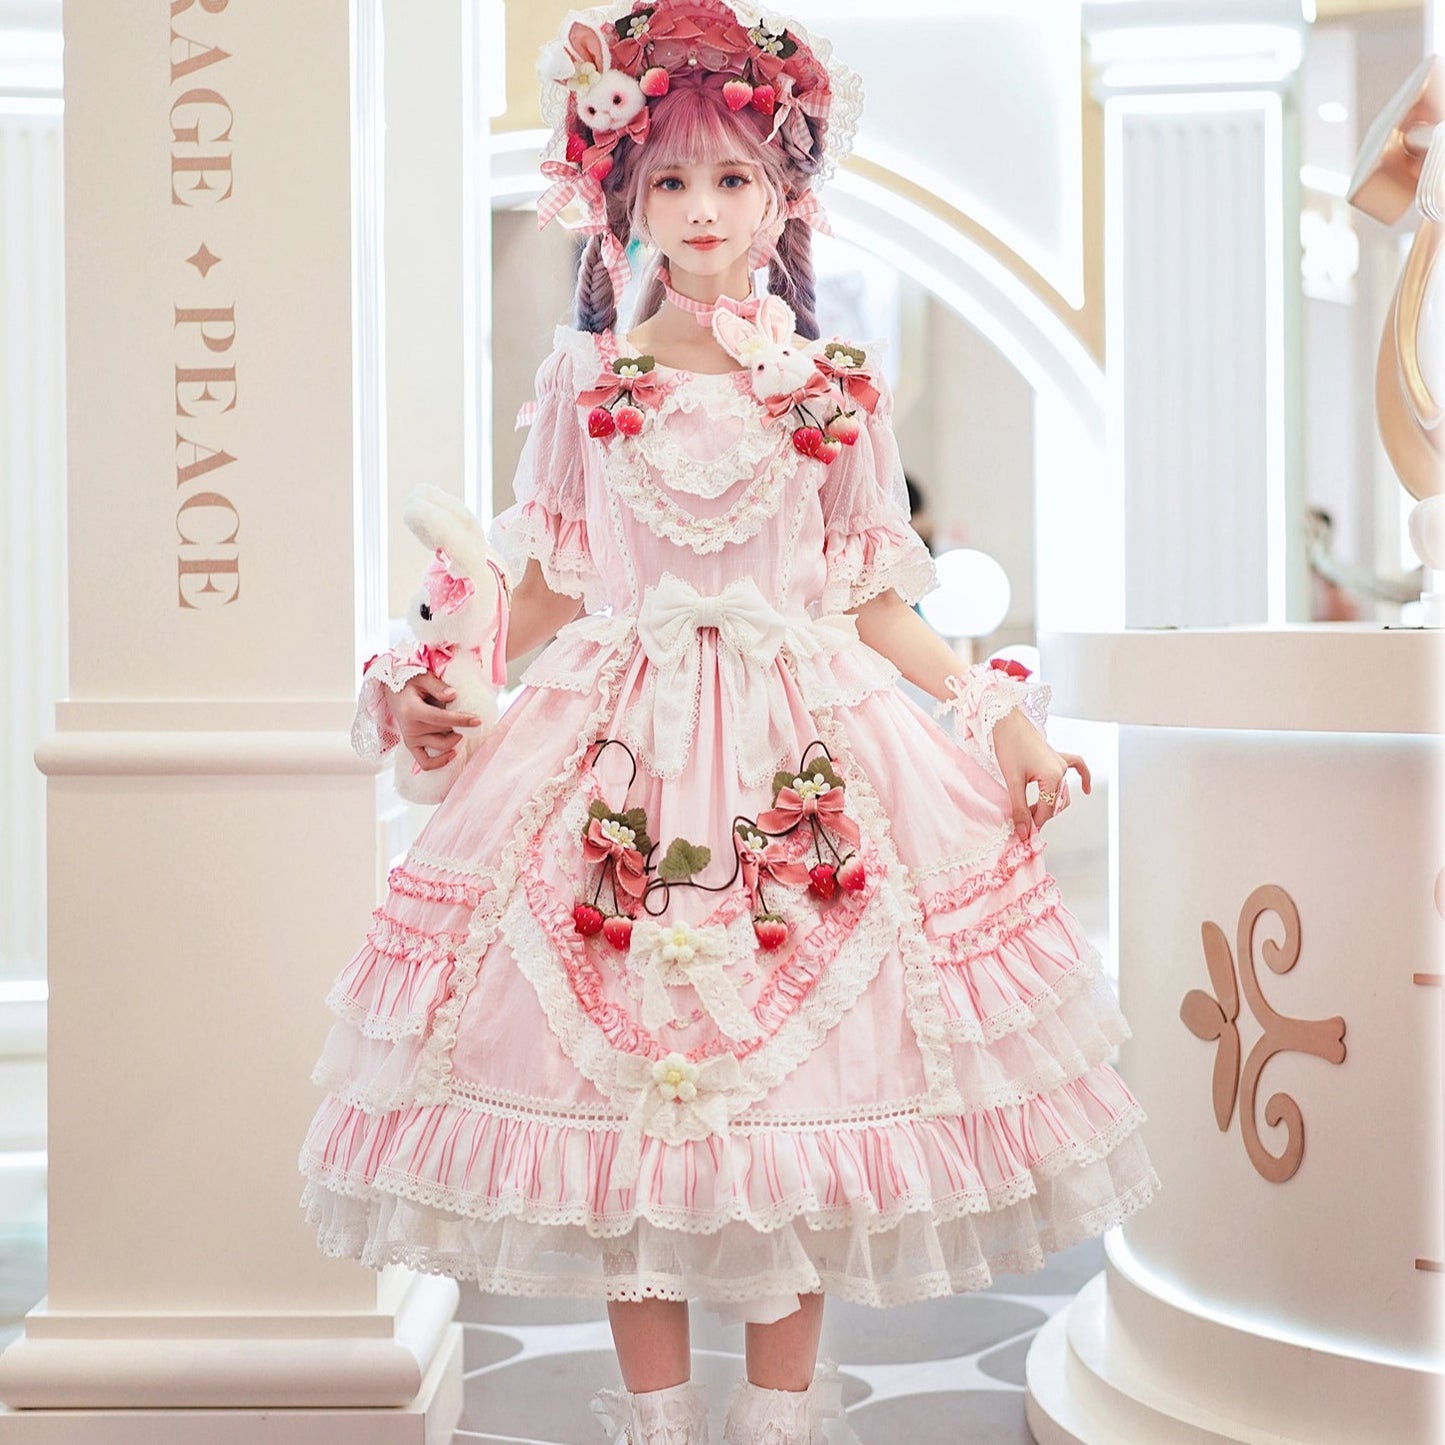 Strawberry princess dress with ruffles and ribbons in 4 colors